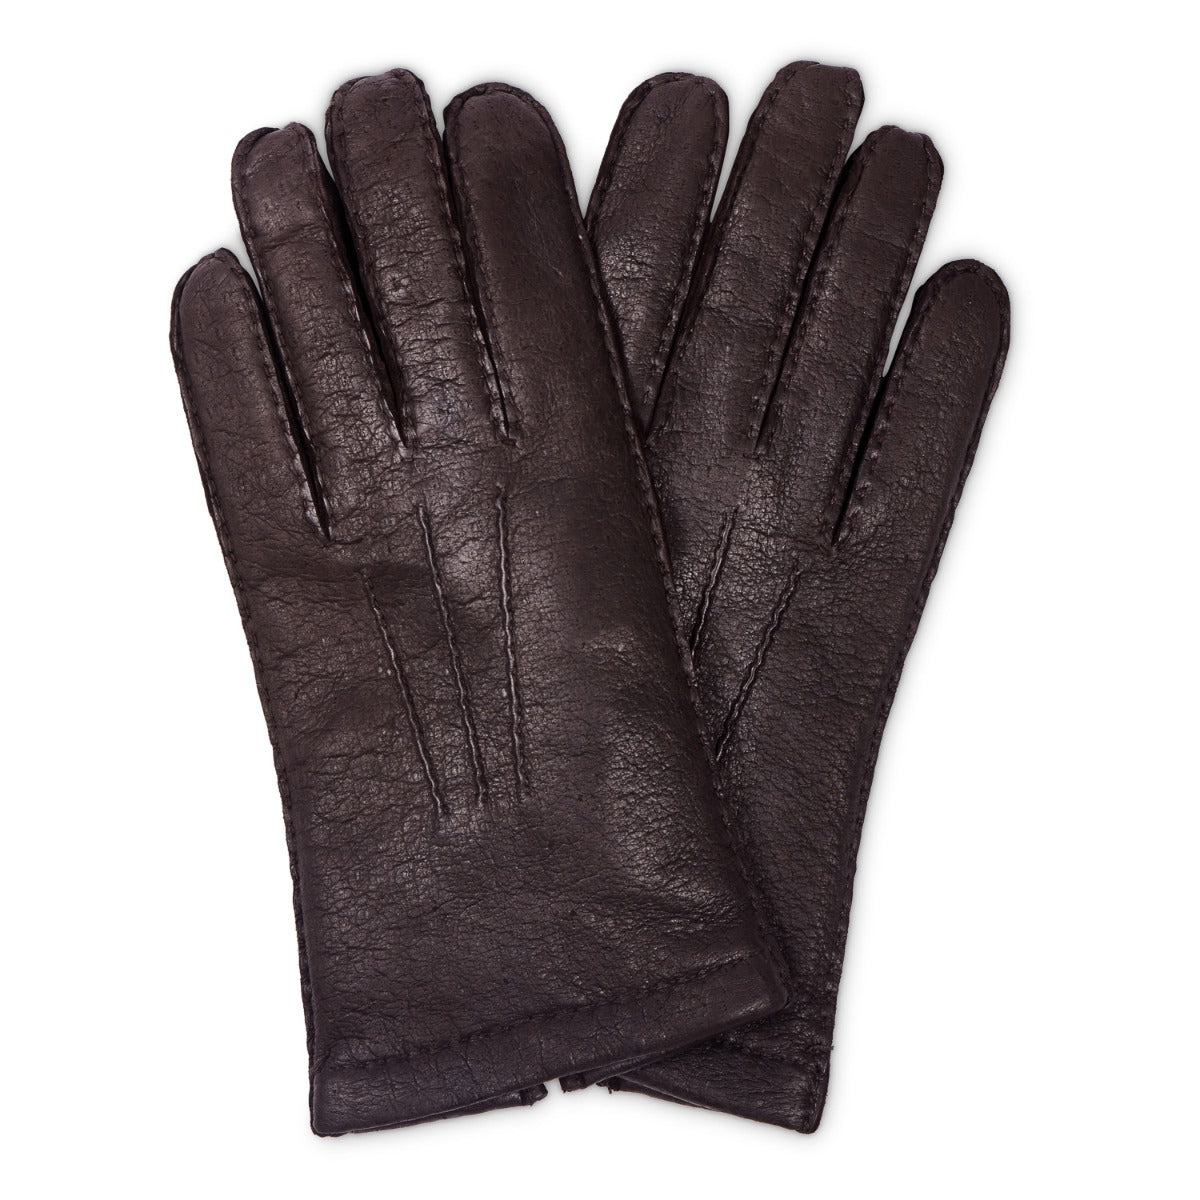 Sovereign Grade Dark Brown Peccary Leather Gloves, Unlined by KirbyAllison.com on a white background.